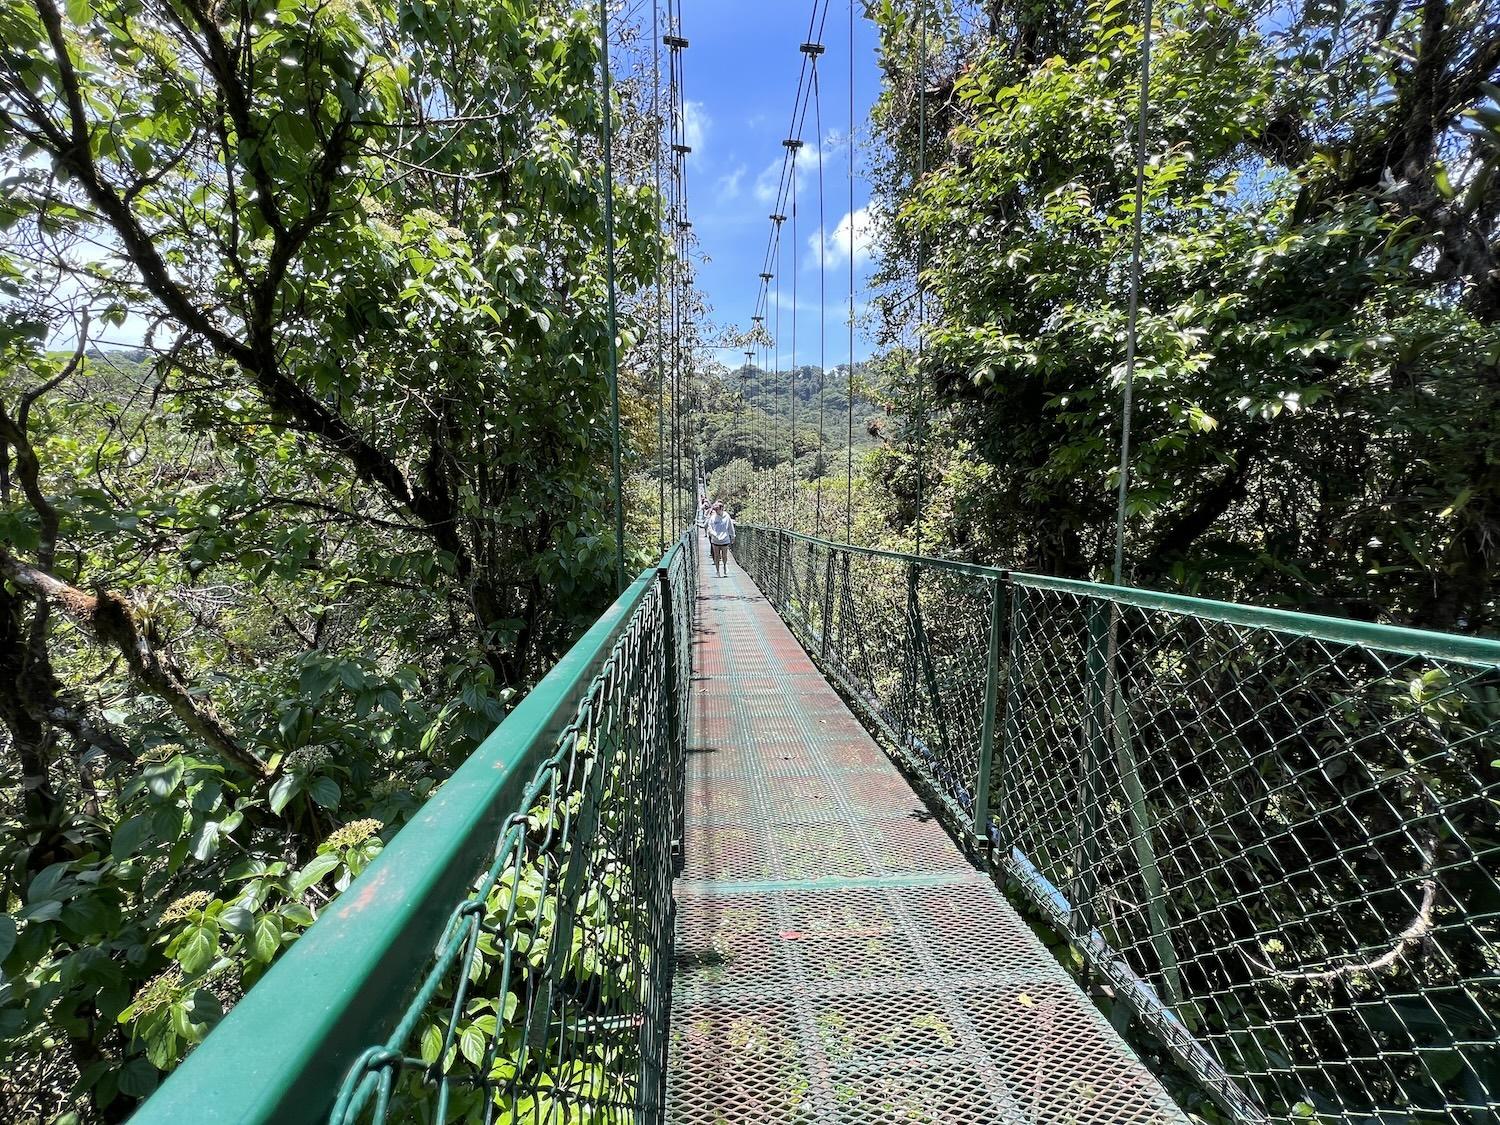 At Selvatura Park, people walk through the cloud forest on eight hanging suspension bridges.